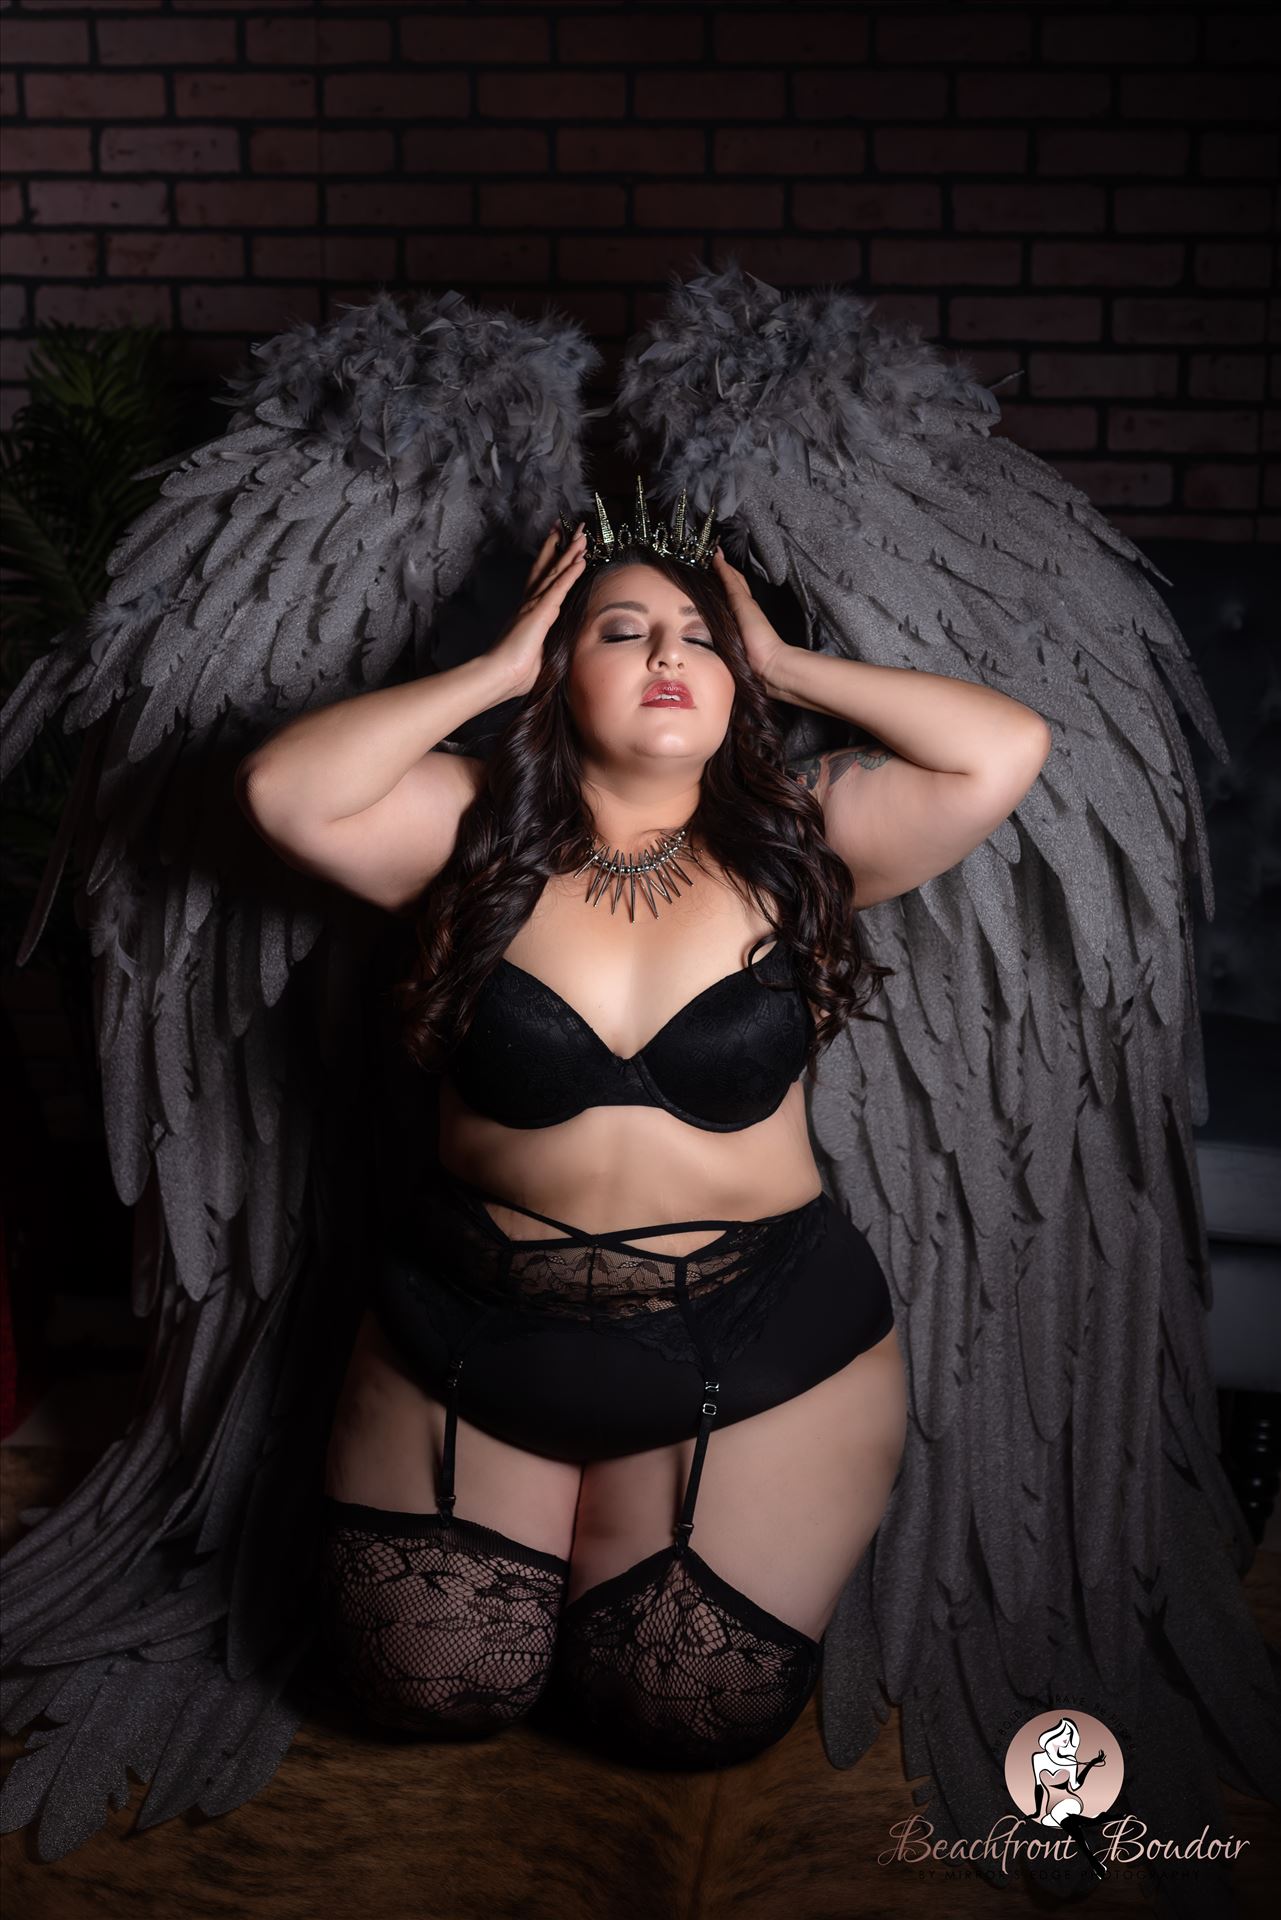 Port-2.JPG Beachfront Boudoir by Mirror's Edge Photography is a Boutique Luxury Boudoir Photography Studio located in San Luis Obispo County. My mission is to show as many women as possible how beautiful they truly are! Curvy wings Latina boudoir by Sarah Williams